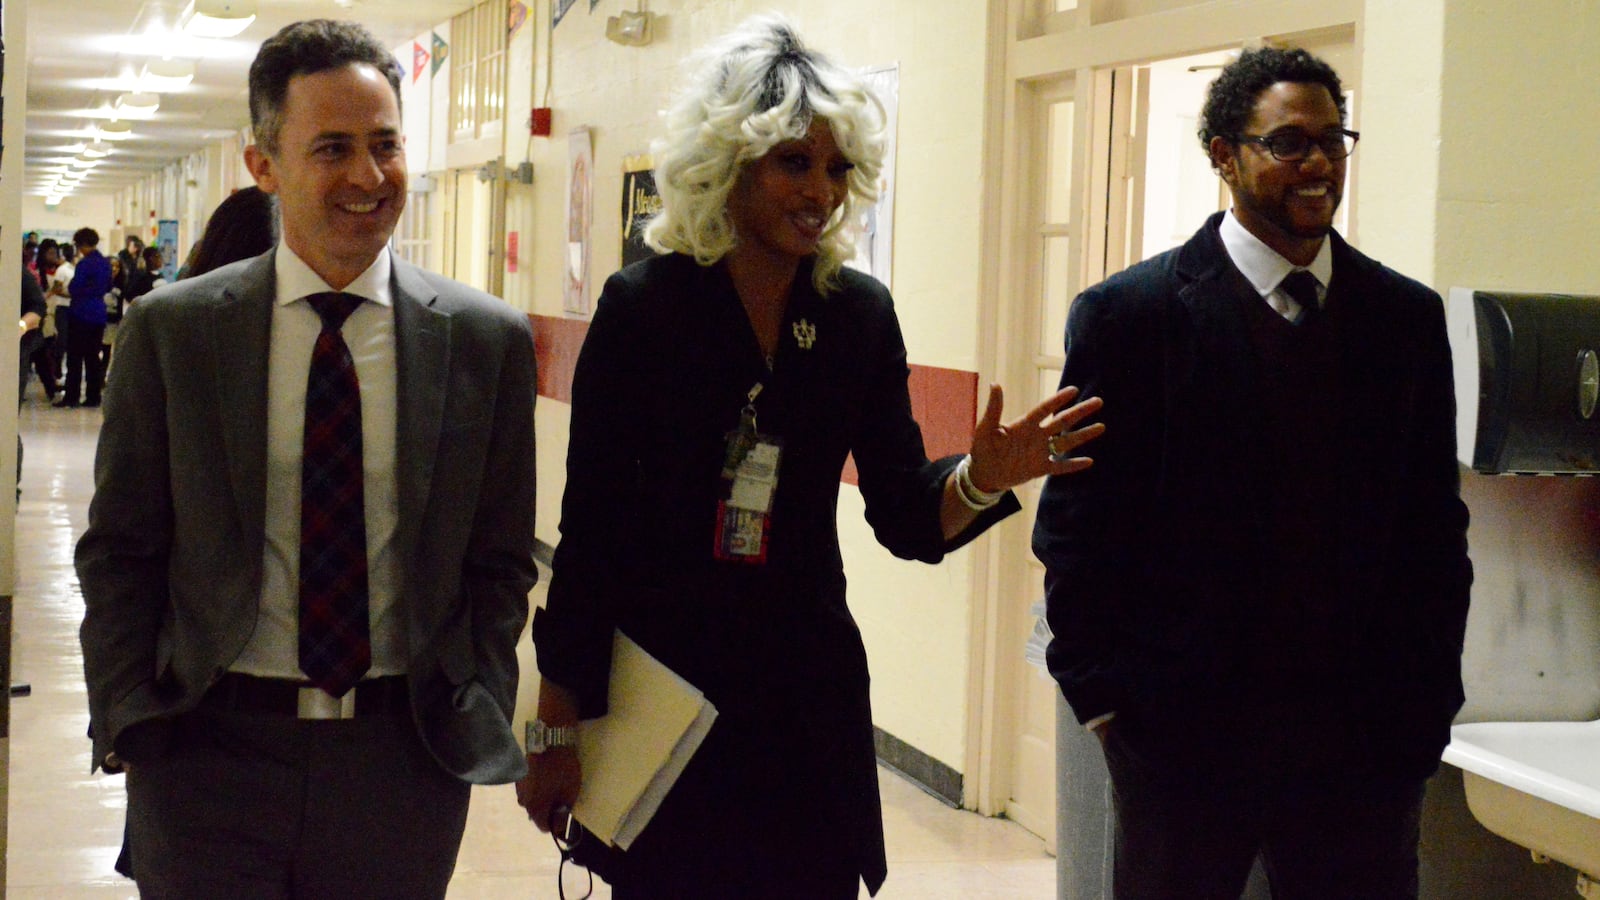 Shelby County Schools Innovation Zone superintendent Sharon Griffin is flanked by Jason Kamras and Gene Pickard, leaders with the District of Columbia Public Schools, during a Wednesday tour of Cherokee Elementary School in Memphis.